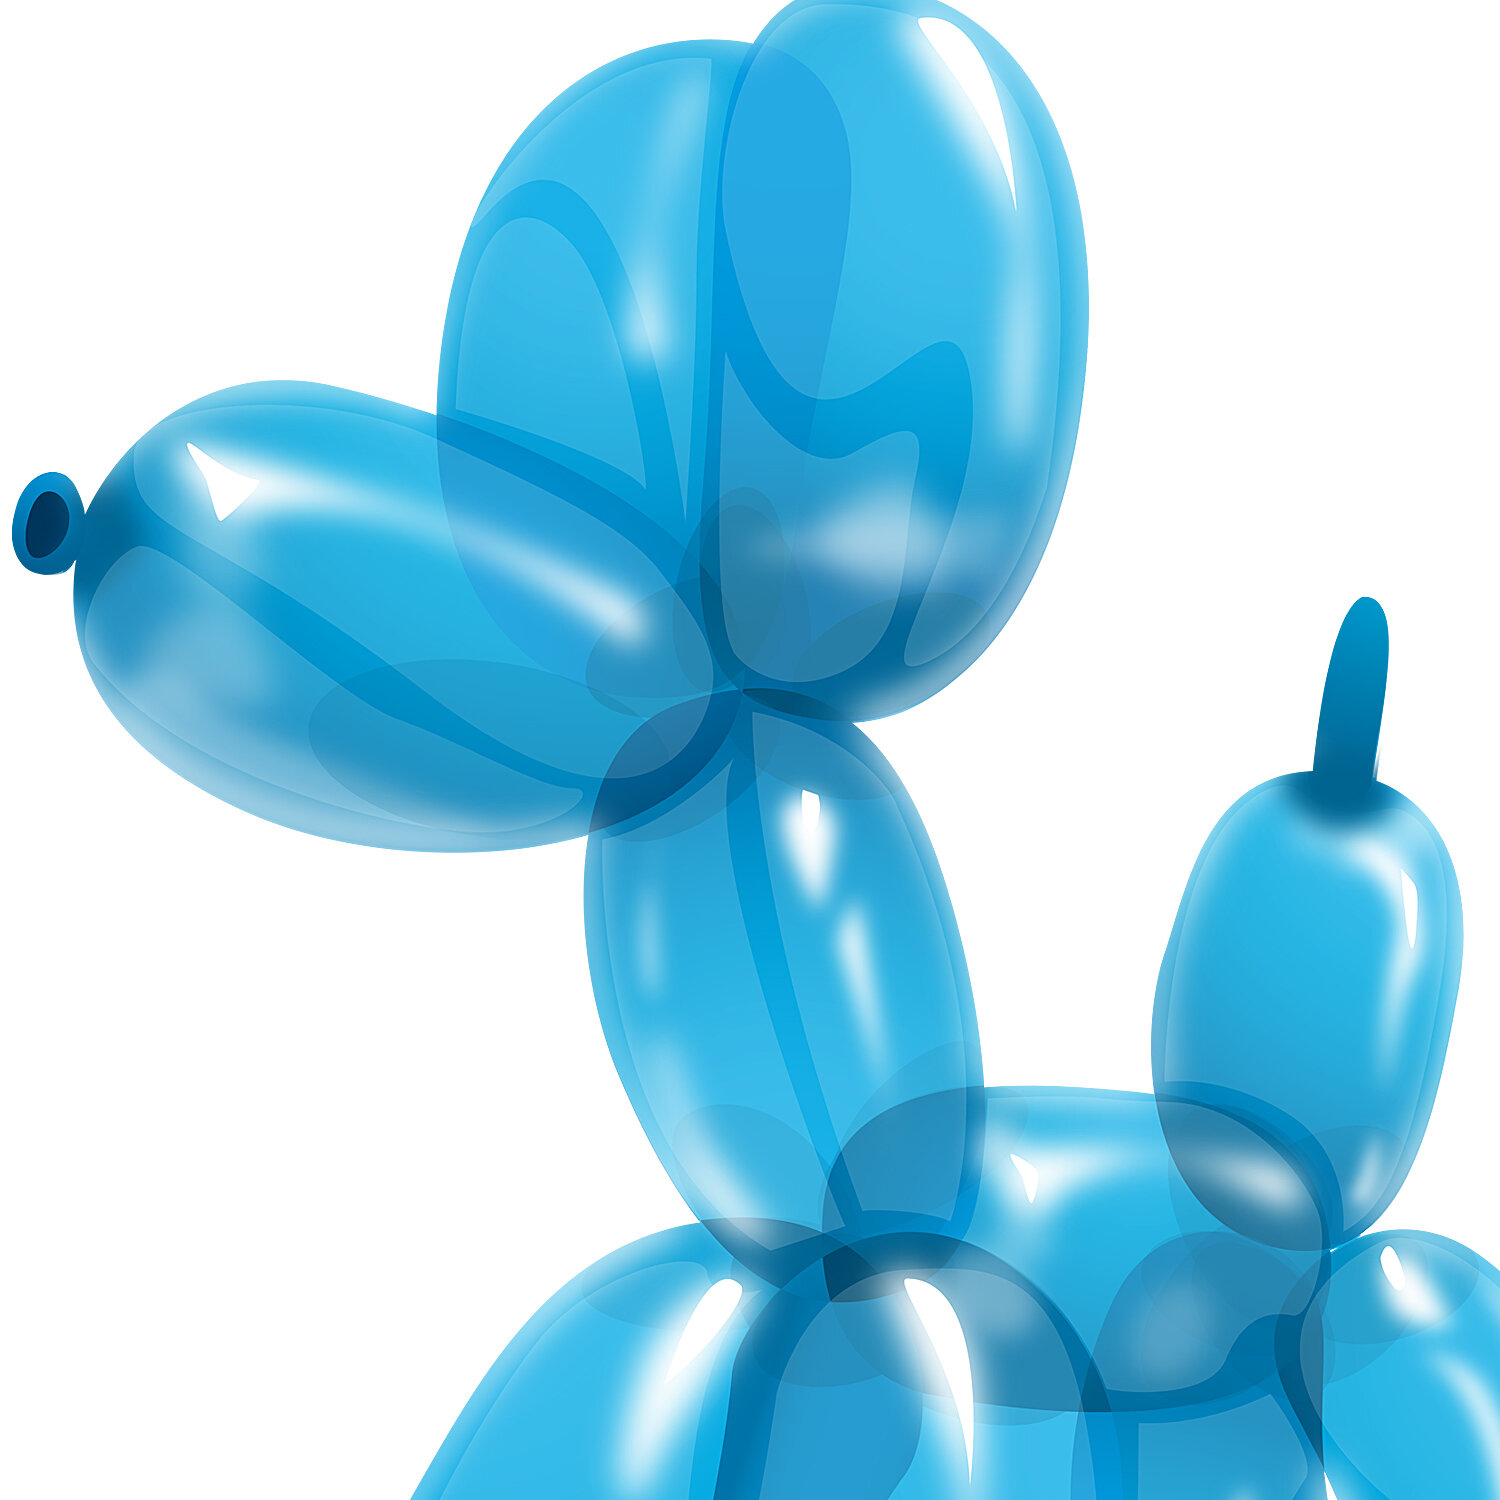 Dog Balloons, detail - Wall Decals